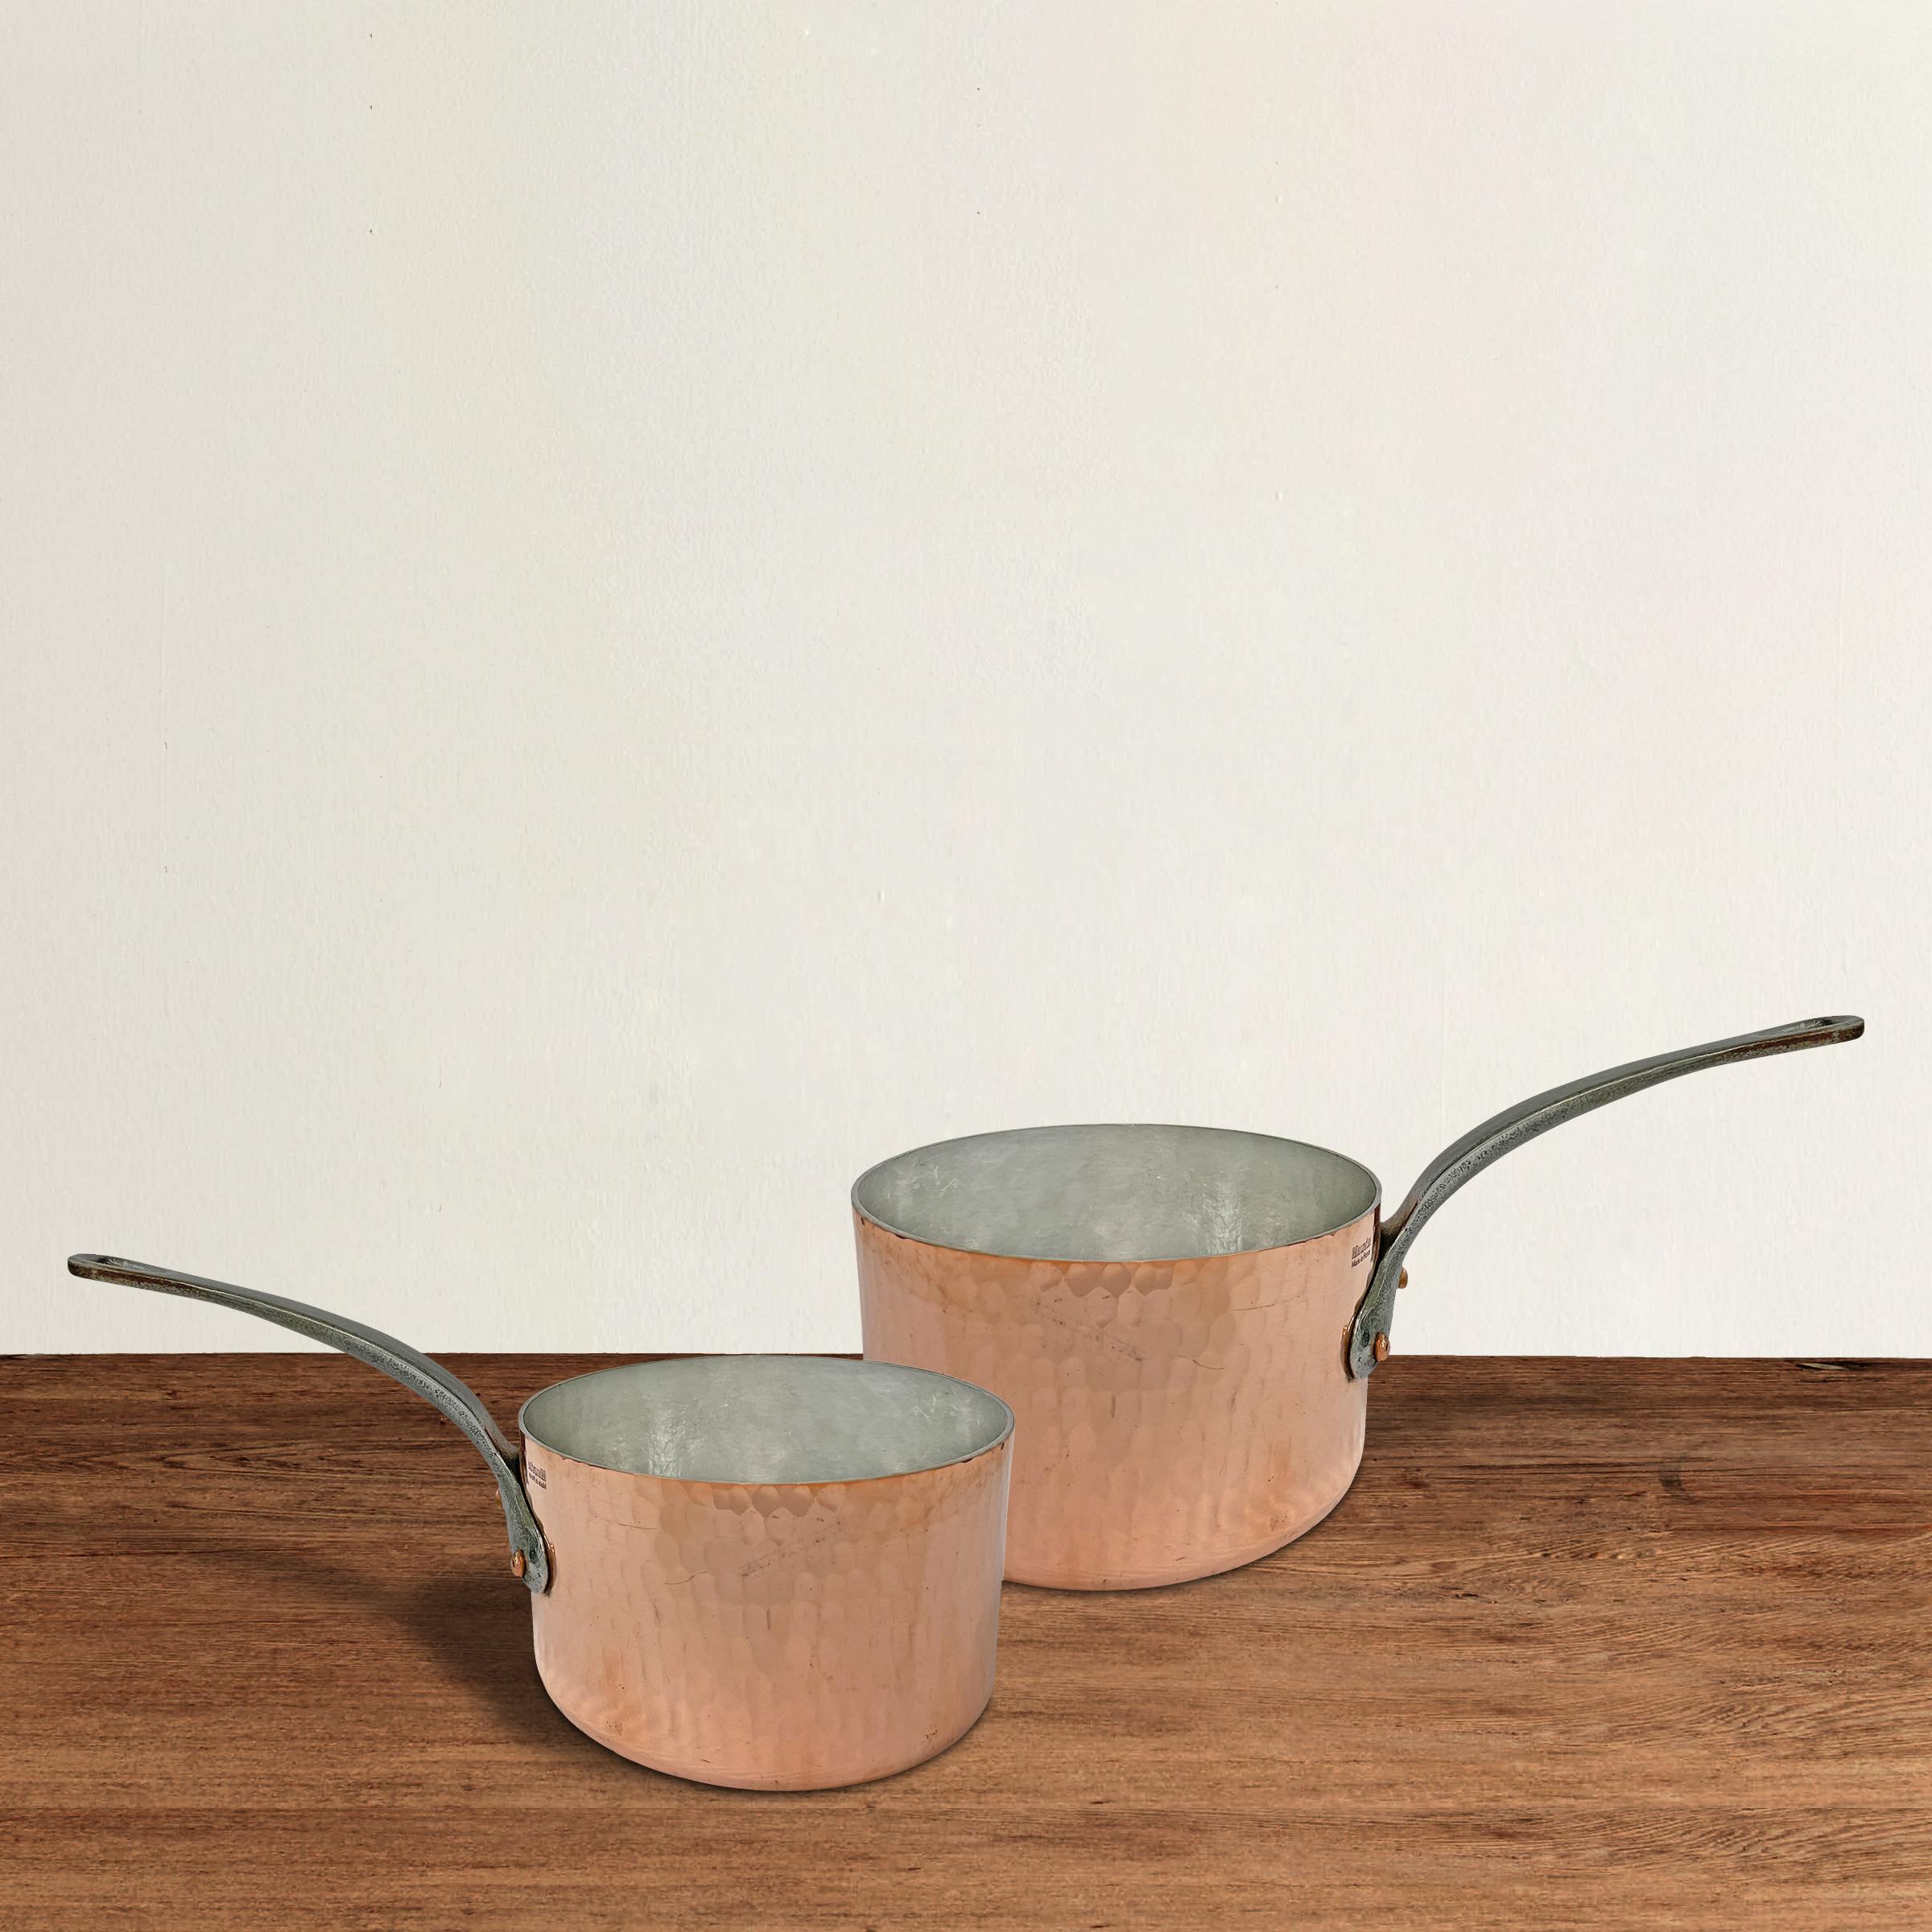 A striking set of early 21st century French hammered 3 mm copper saucepans by Mauviel, each with iron handles, a sign that these were intended for commercial restaurant use. The pans have been newly tinned and are ready for use.

Small: 12.75 in.